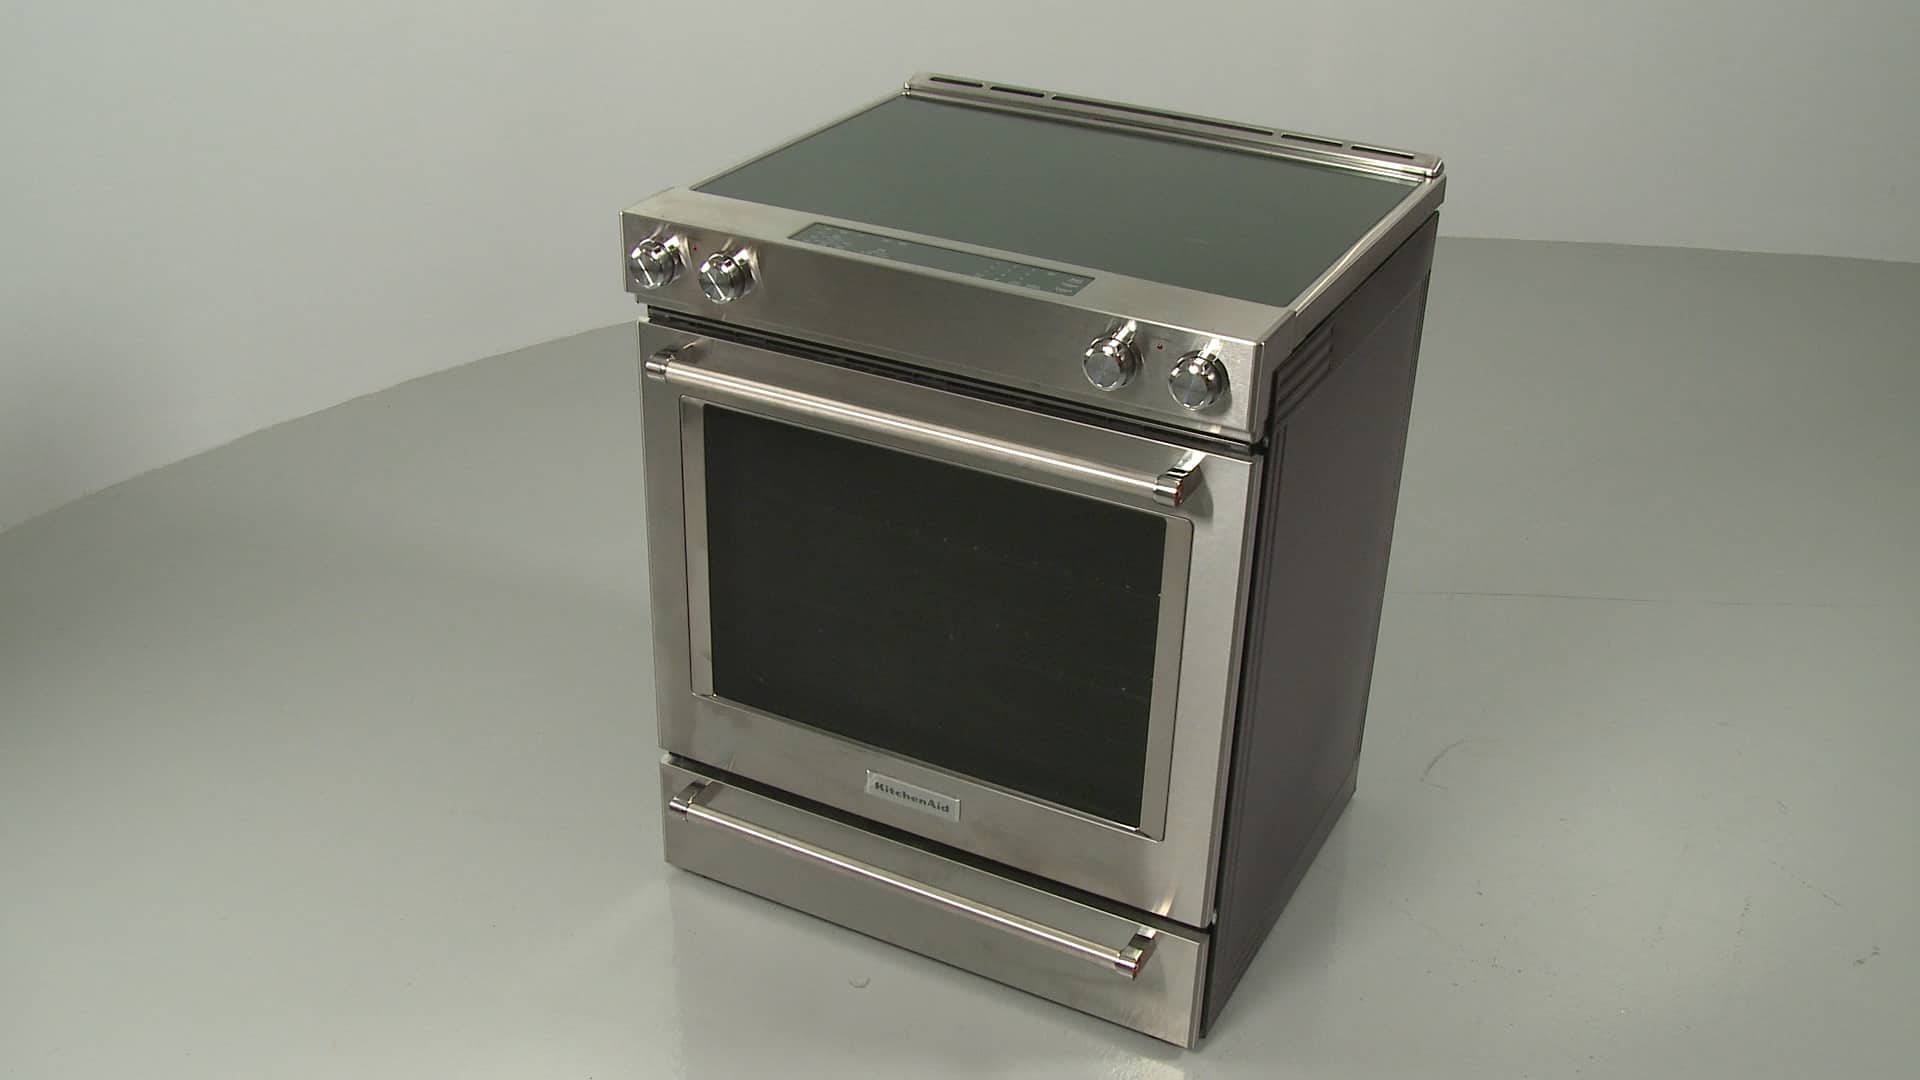 Ge electric oven will not heat up past 100 degrees What Would Cause An Electric Oven To Not Heat Up Diy Repair Clinic